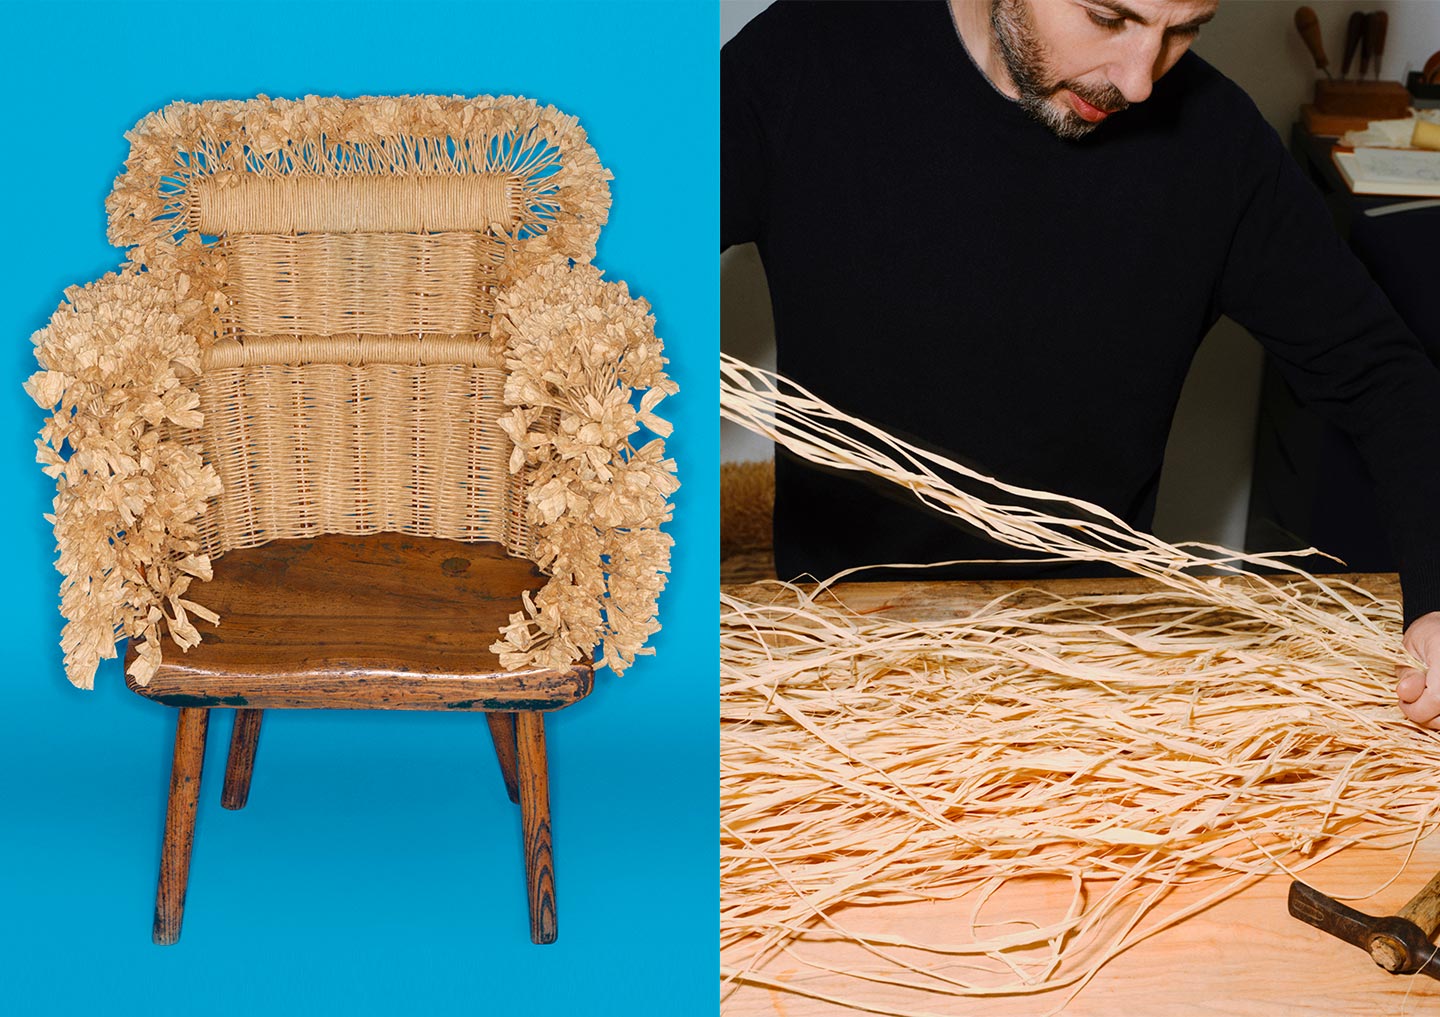 Loewe returned to the Salone del Mobile with a collection of chairs reimagined by artisans to become unique items. Chairs were embellished with natural fibres including raffia. © Loewe